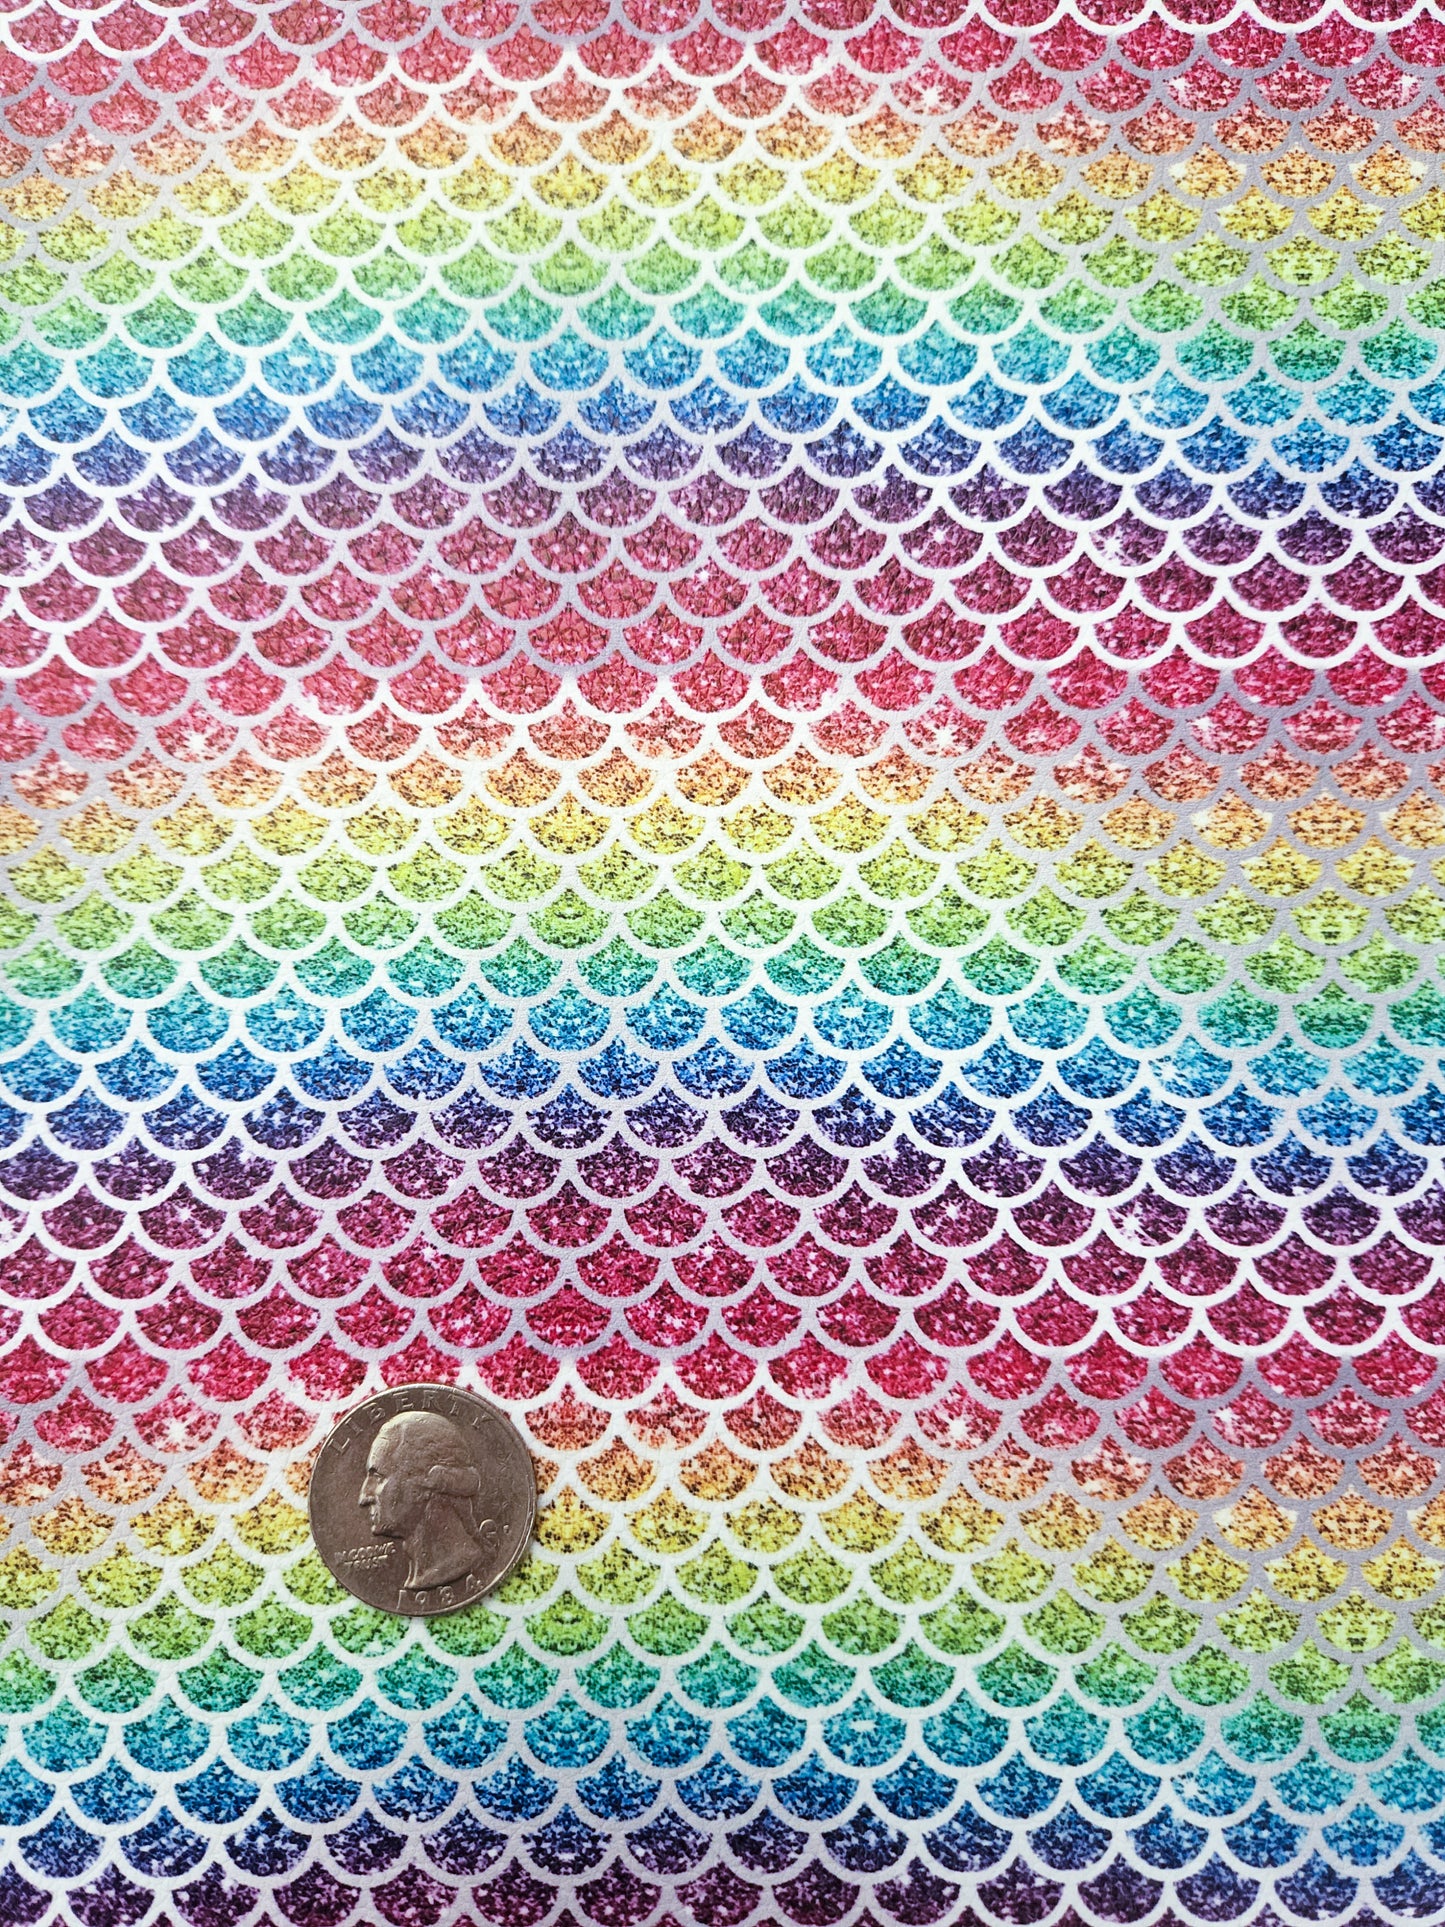 Rainbow Sparkle Mermaid Scales 9x12 faux leather sheet